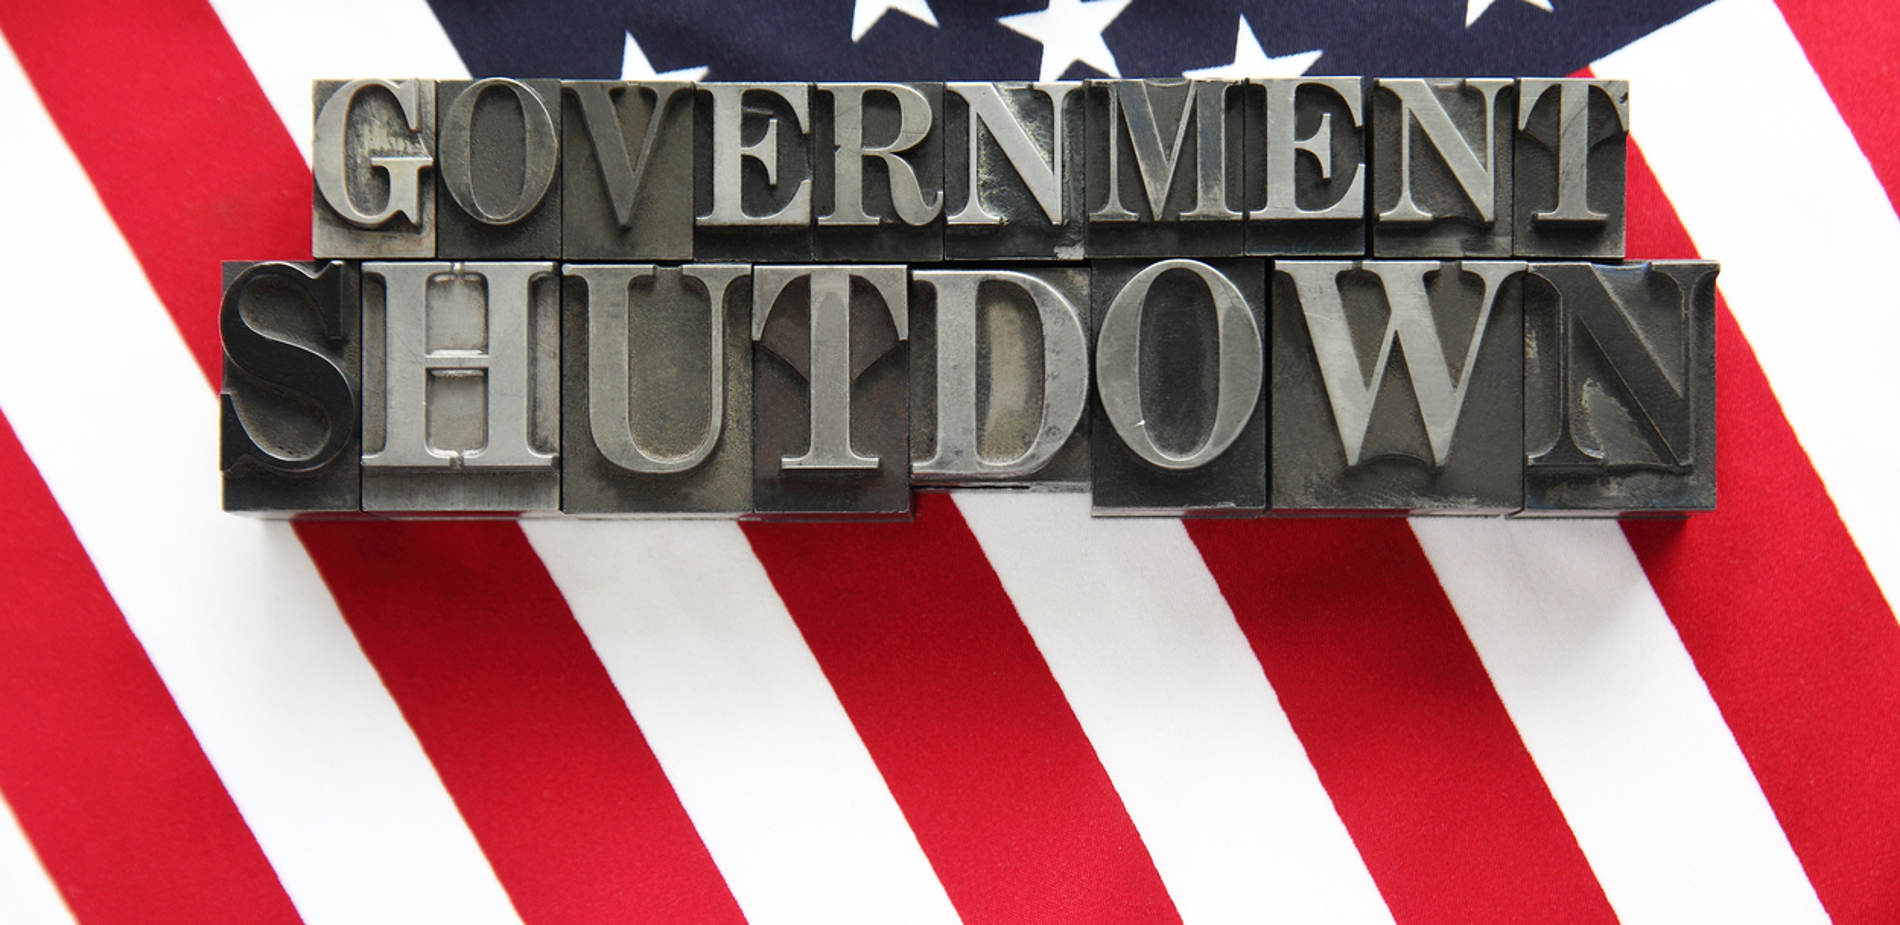 What Is a Government Shutdown and Why Does It Concern Investors Like You?